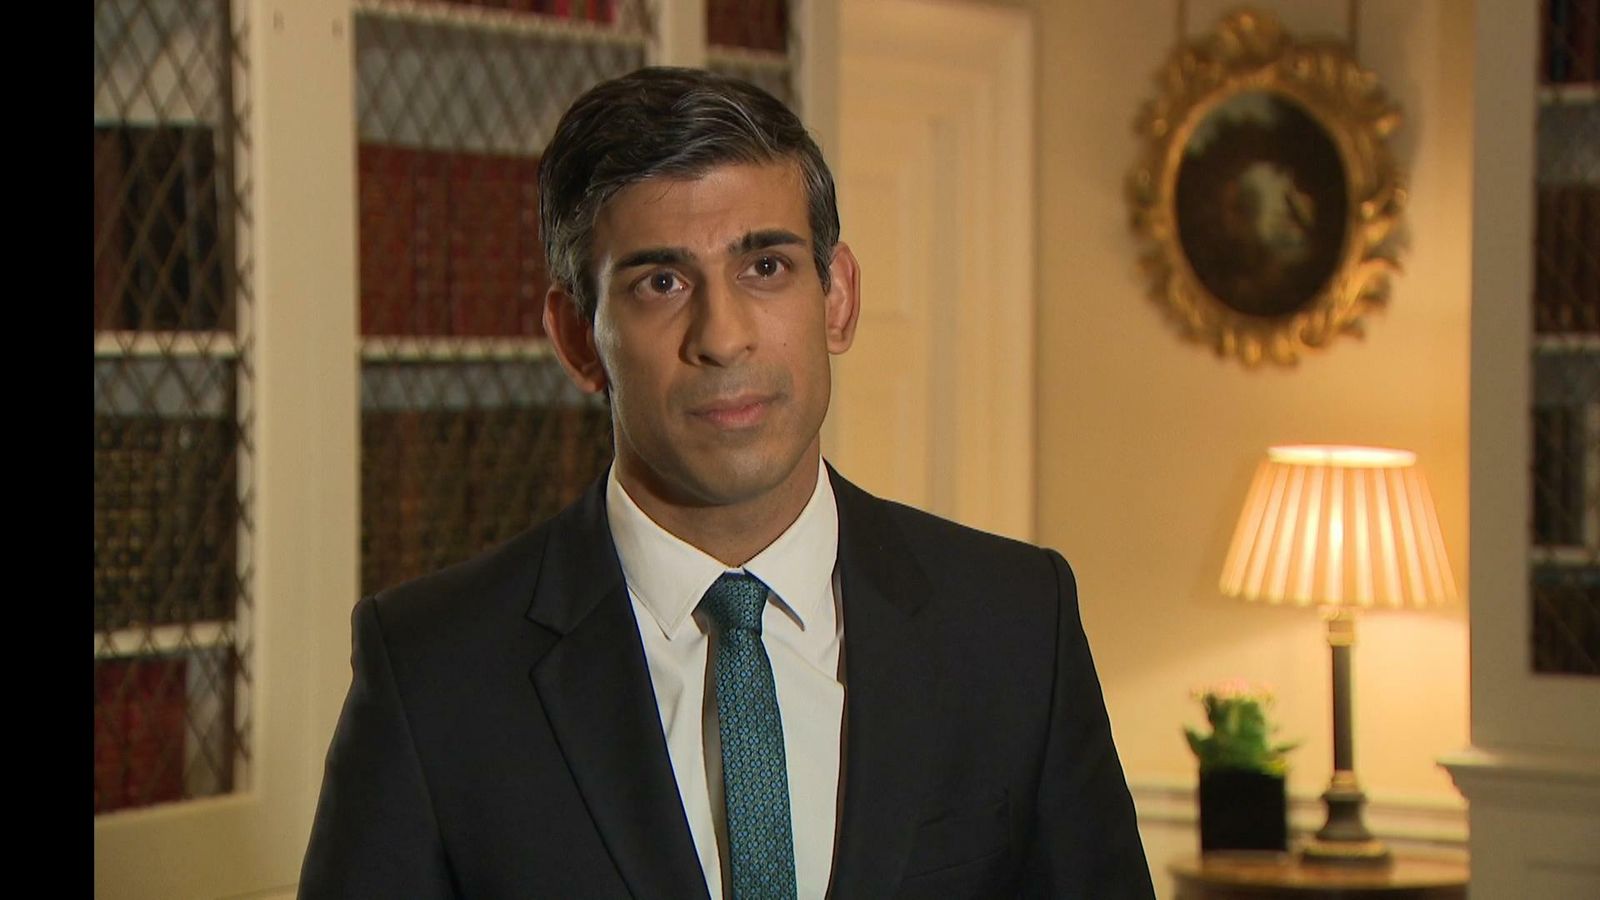 Rishi Sunak says ‘racism must be confronted’ after Buckingham Palace row